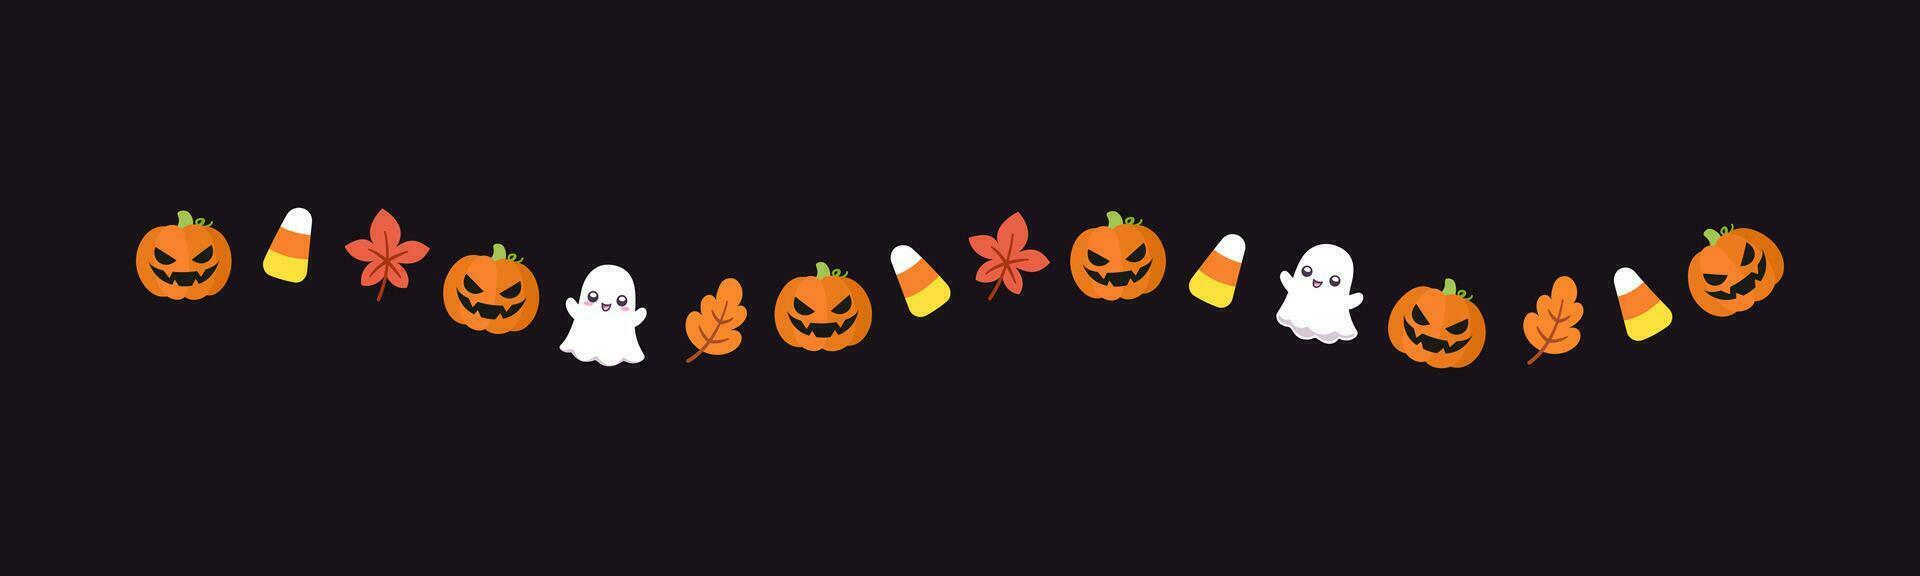 Separator Border illustration line of cute ghost, jack o lanterns, trick or treat icon pattern for Halloween day concept of autumn season vector